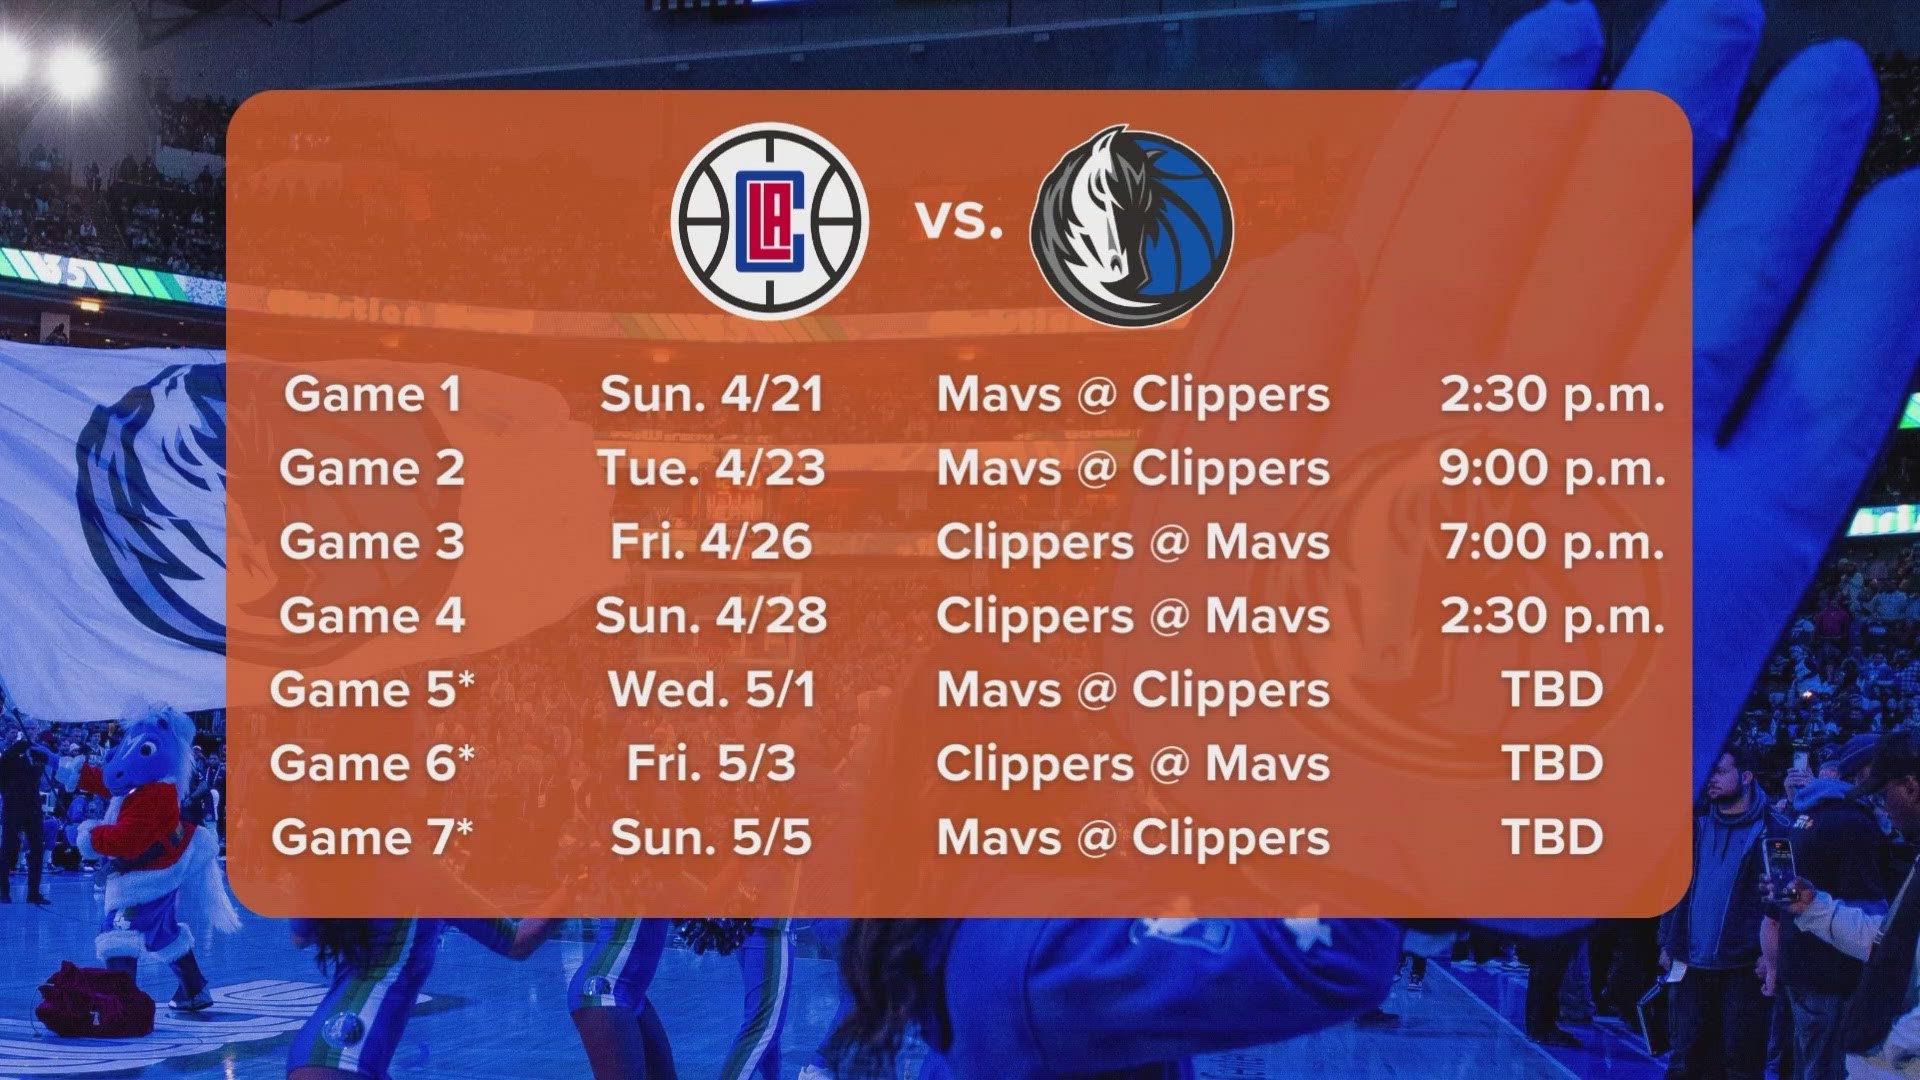 The Mavericks and Clippers will get things going in Game 1 on Sunday at the Staples Center in Los Angeles, with a 2:30 p.m. Central Time tip-off on WFAA.